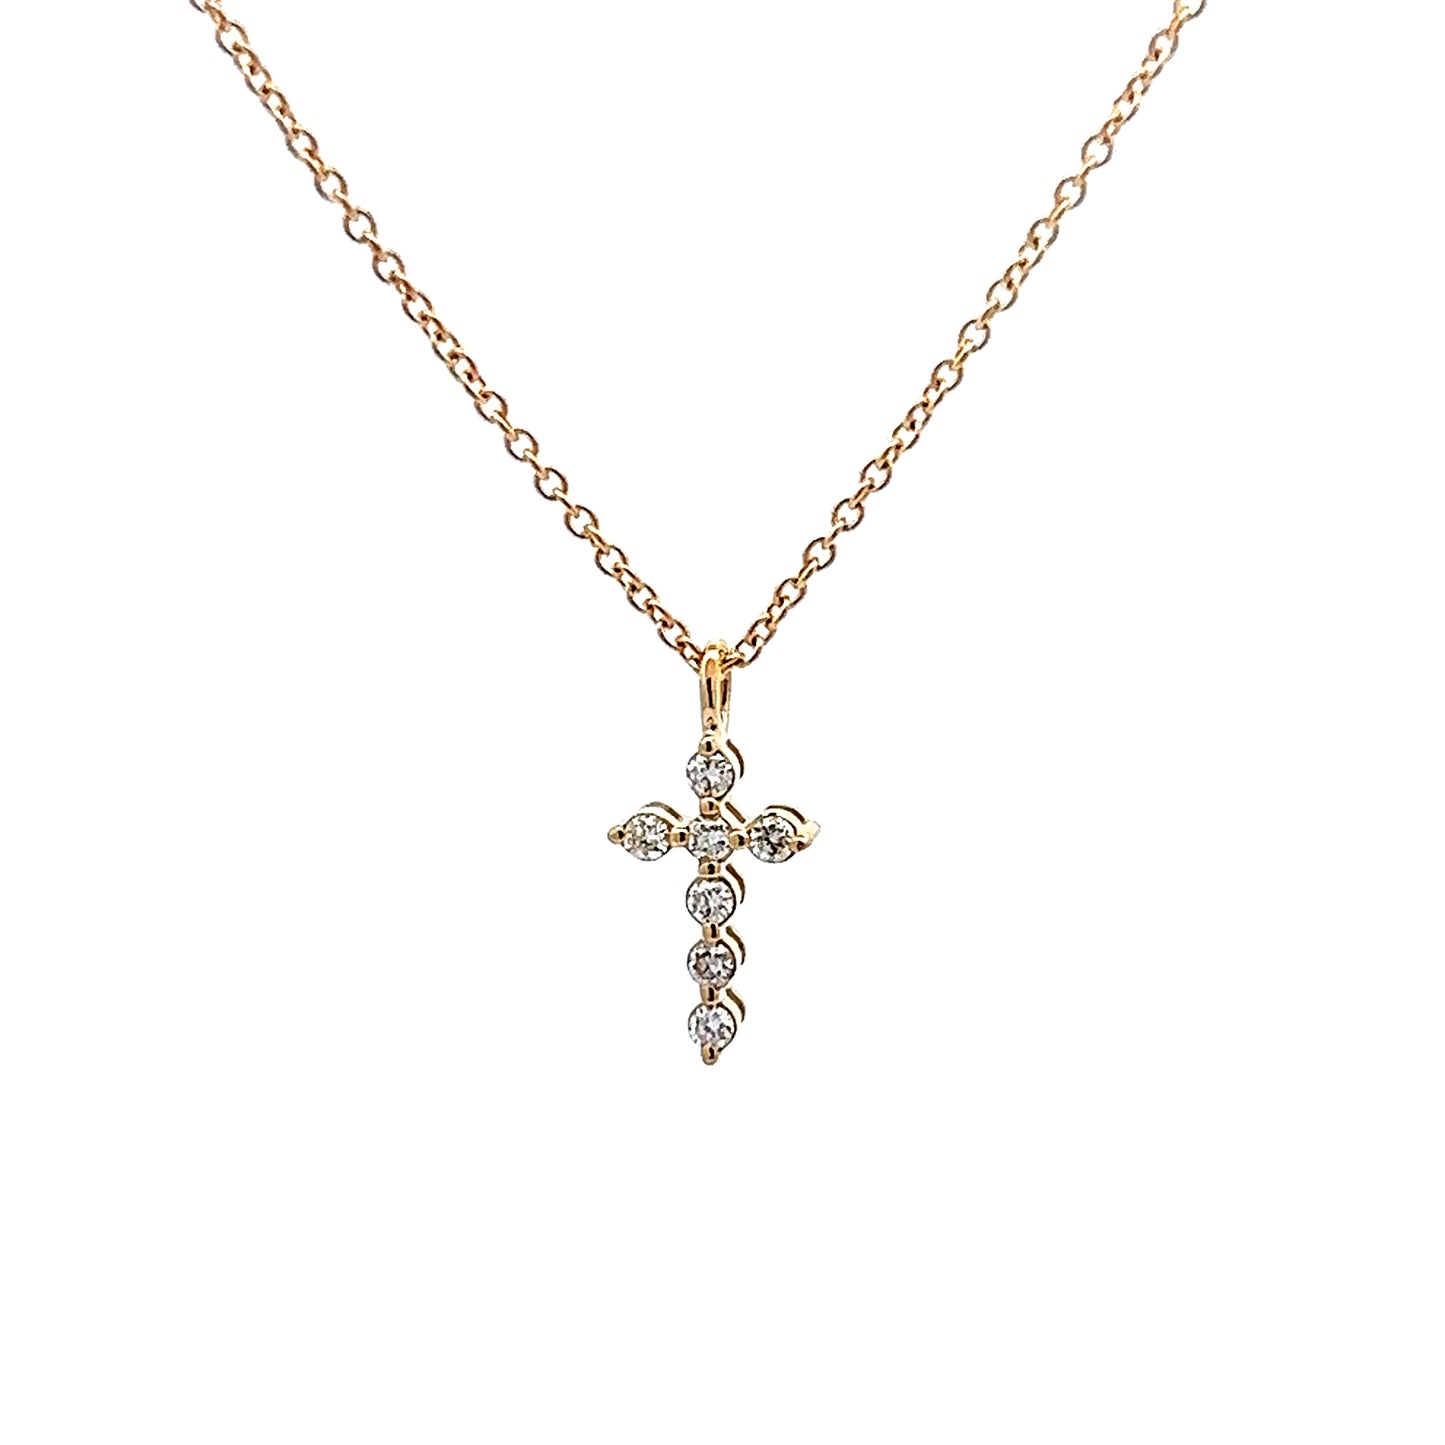 Small Diamond Cross Pendant Necklace in 14k Yellow Gold